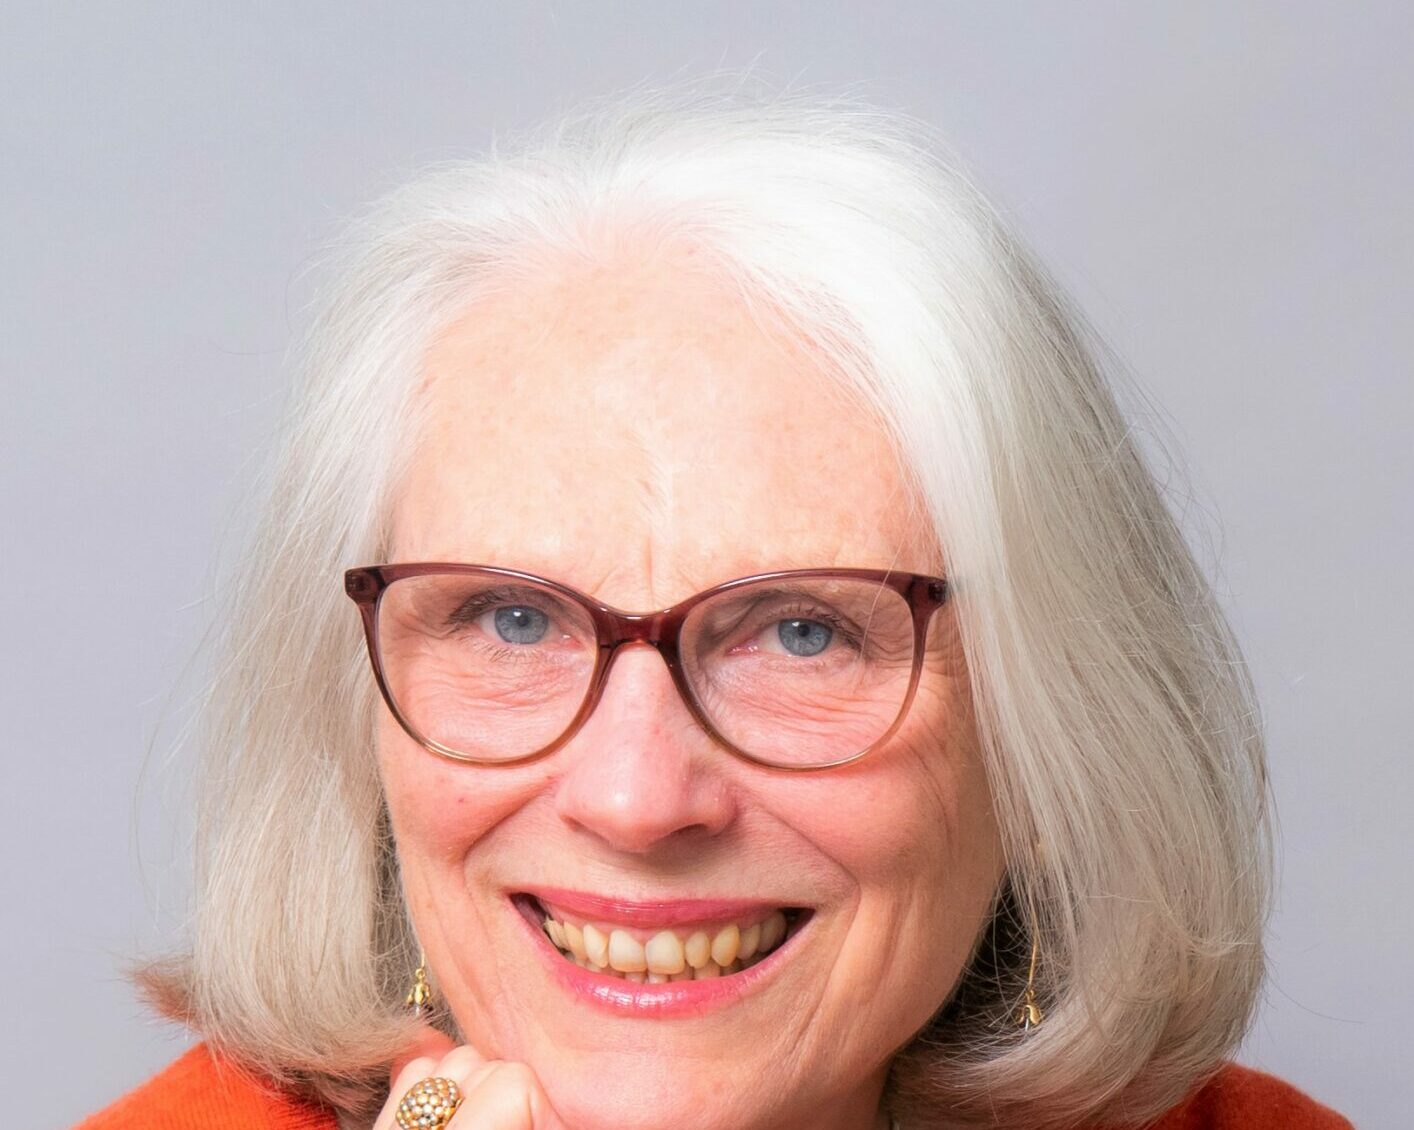 A woman with chin-length straight white hair and red rimmed glasses smiles, resting her chin on her fist